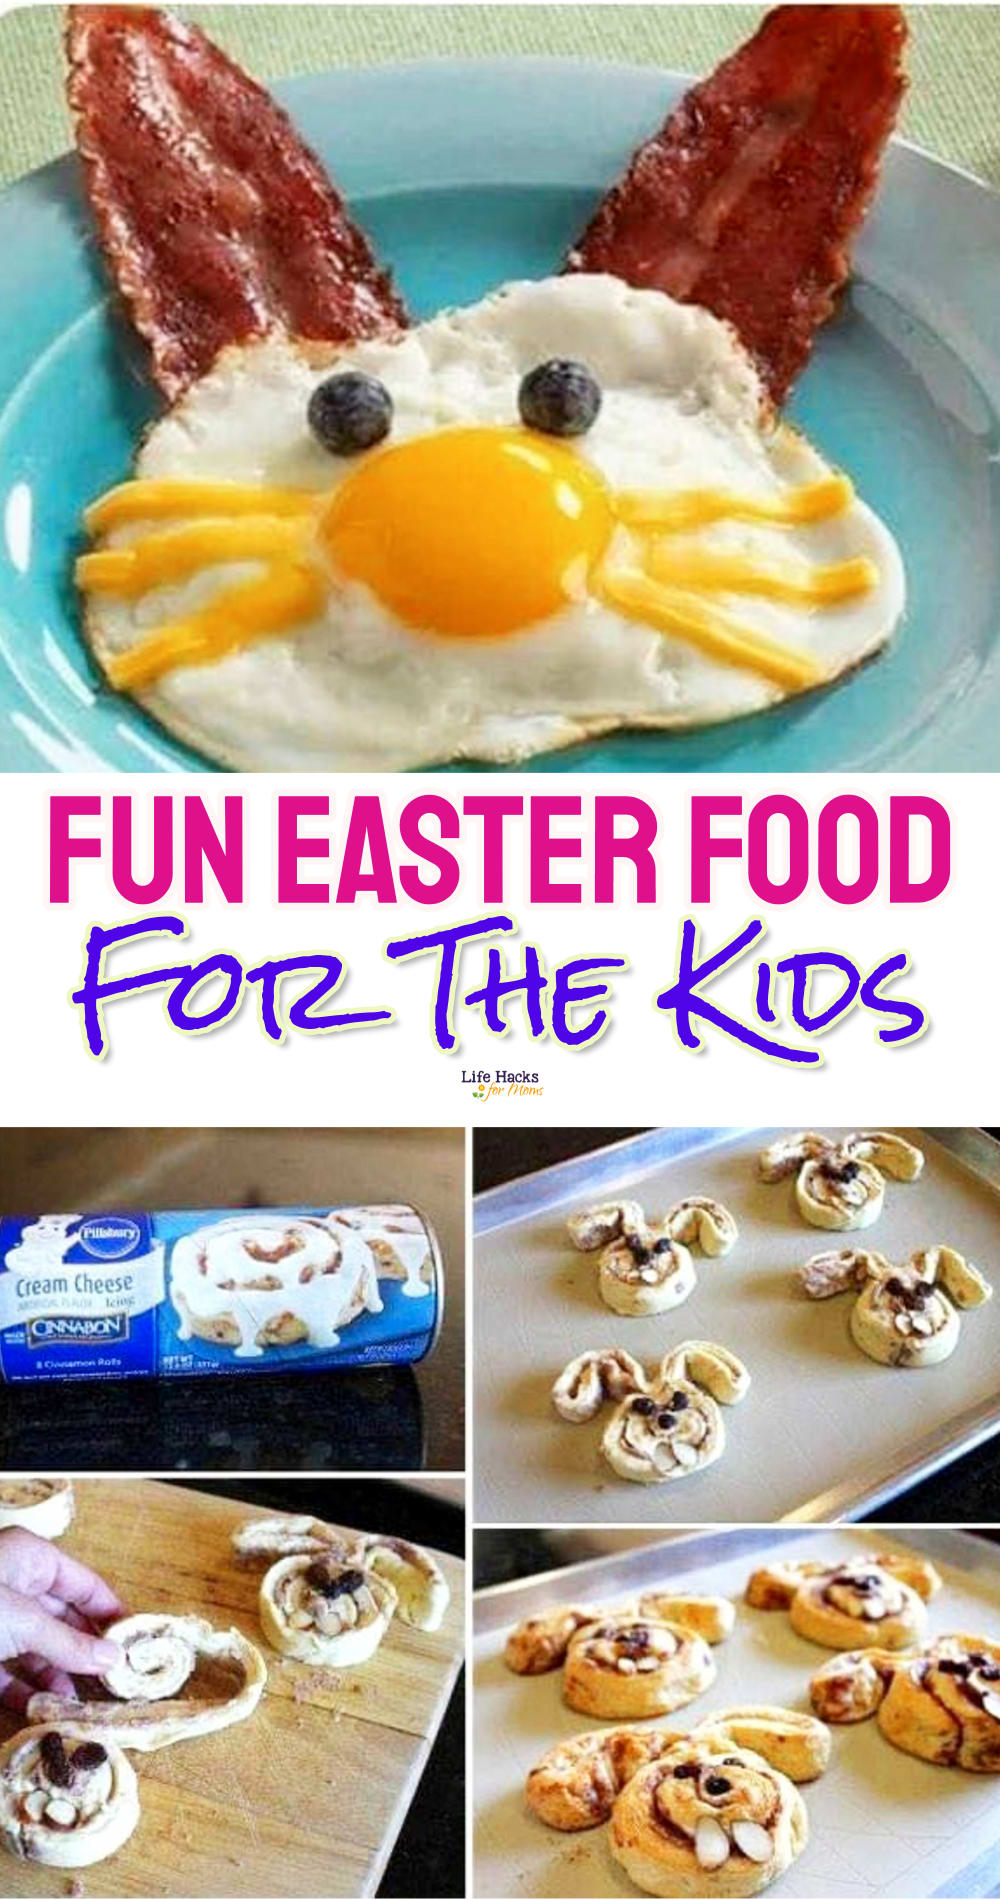 Easter brunch food ideas for kids - what we brought to our Easter potluck at church